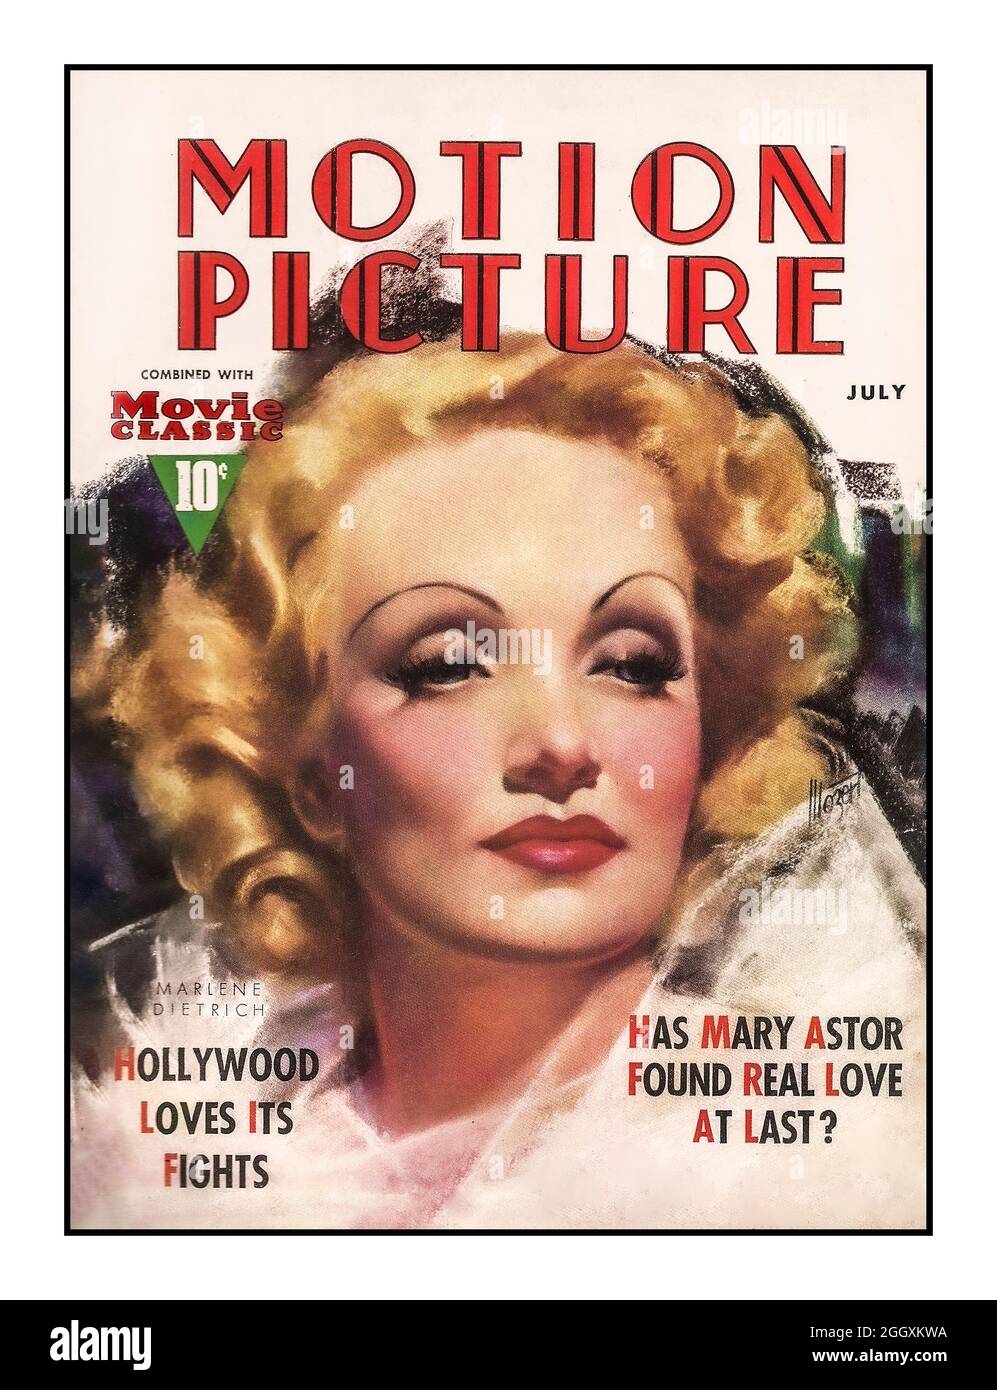 Marlene Dietrich Vintage 1937 Movie Magazine 'Motion Picture' combined with Movie Classic priced at 10cents with Marlene Dietrich famous  femme fatale female movie star on the front cover. Stock Photo